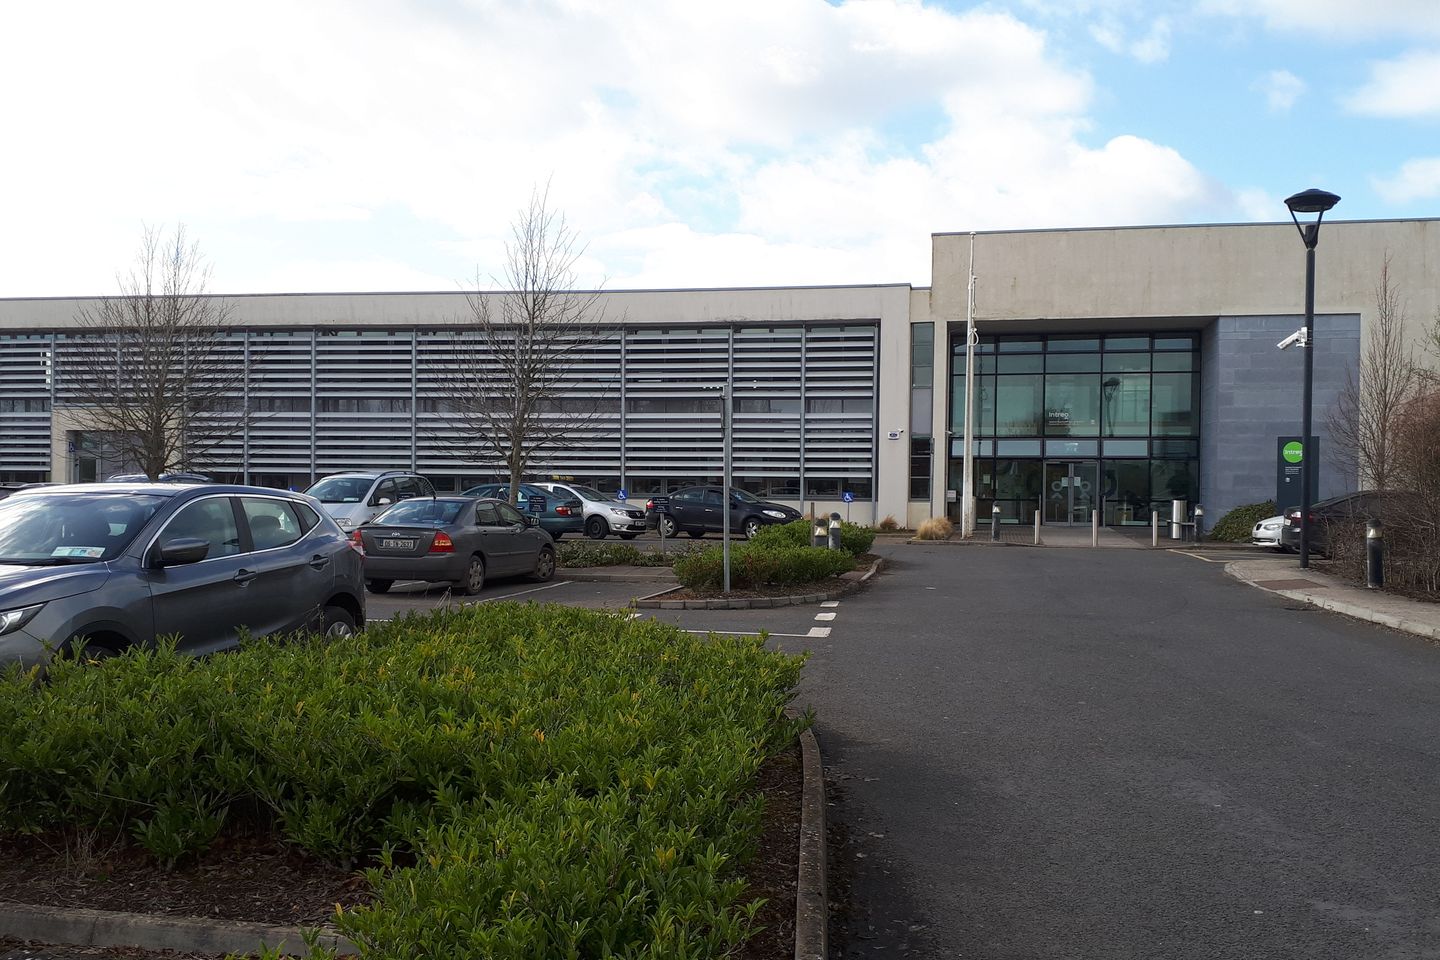 Unit H5, Tipperary Technology Park, Thurles, Co. Tipperary